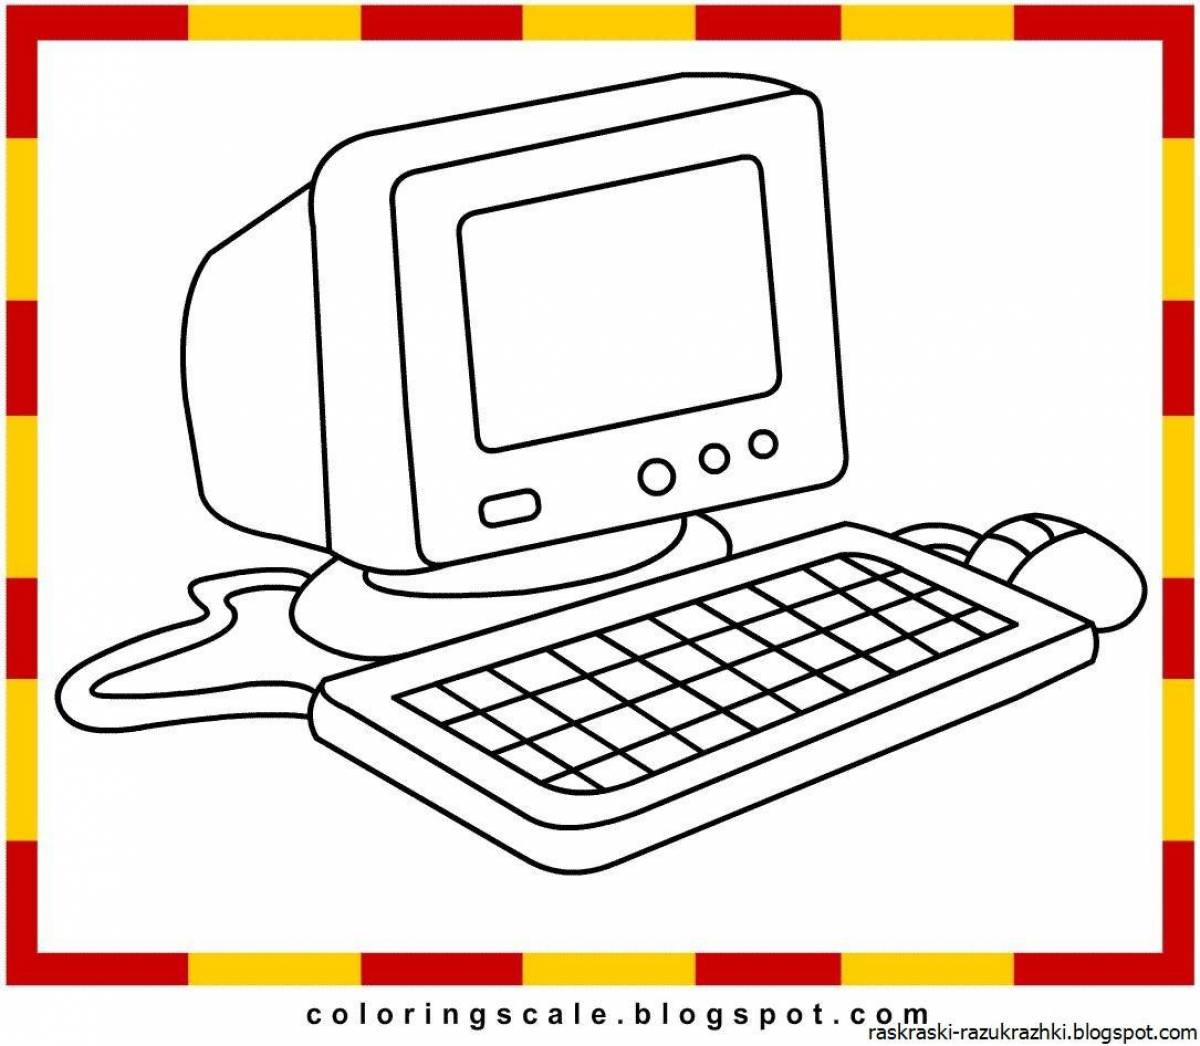 Fun computer coloring for kids